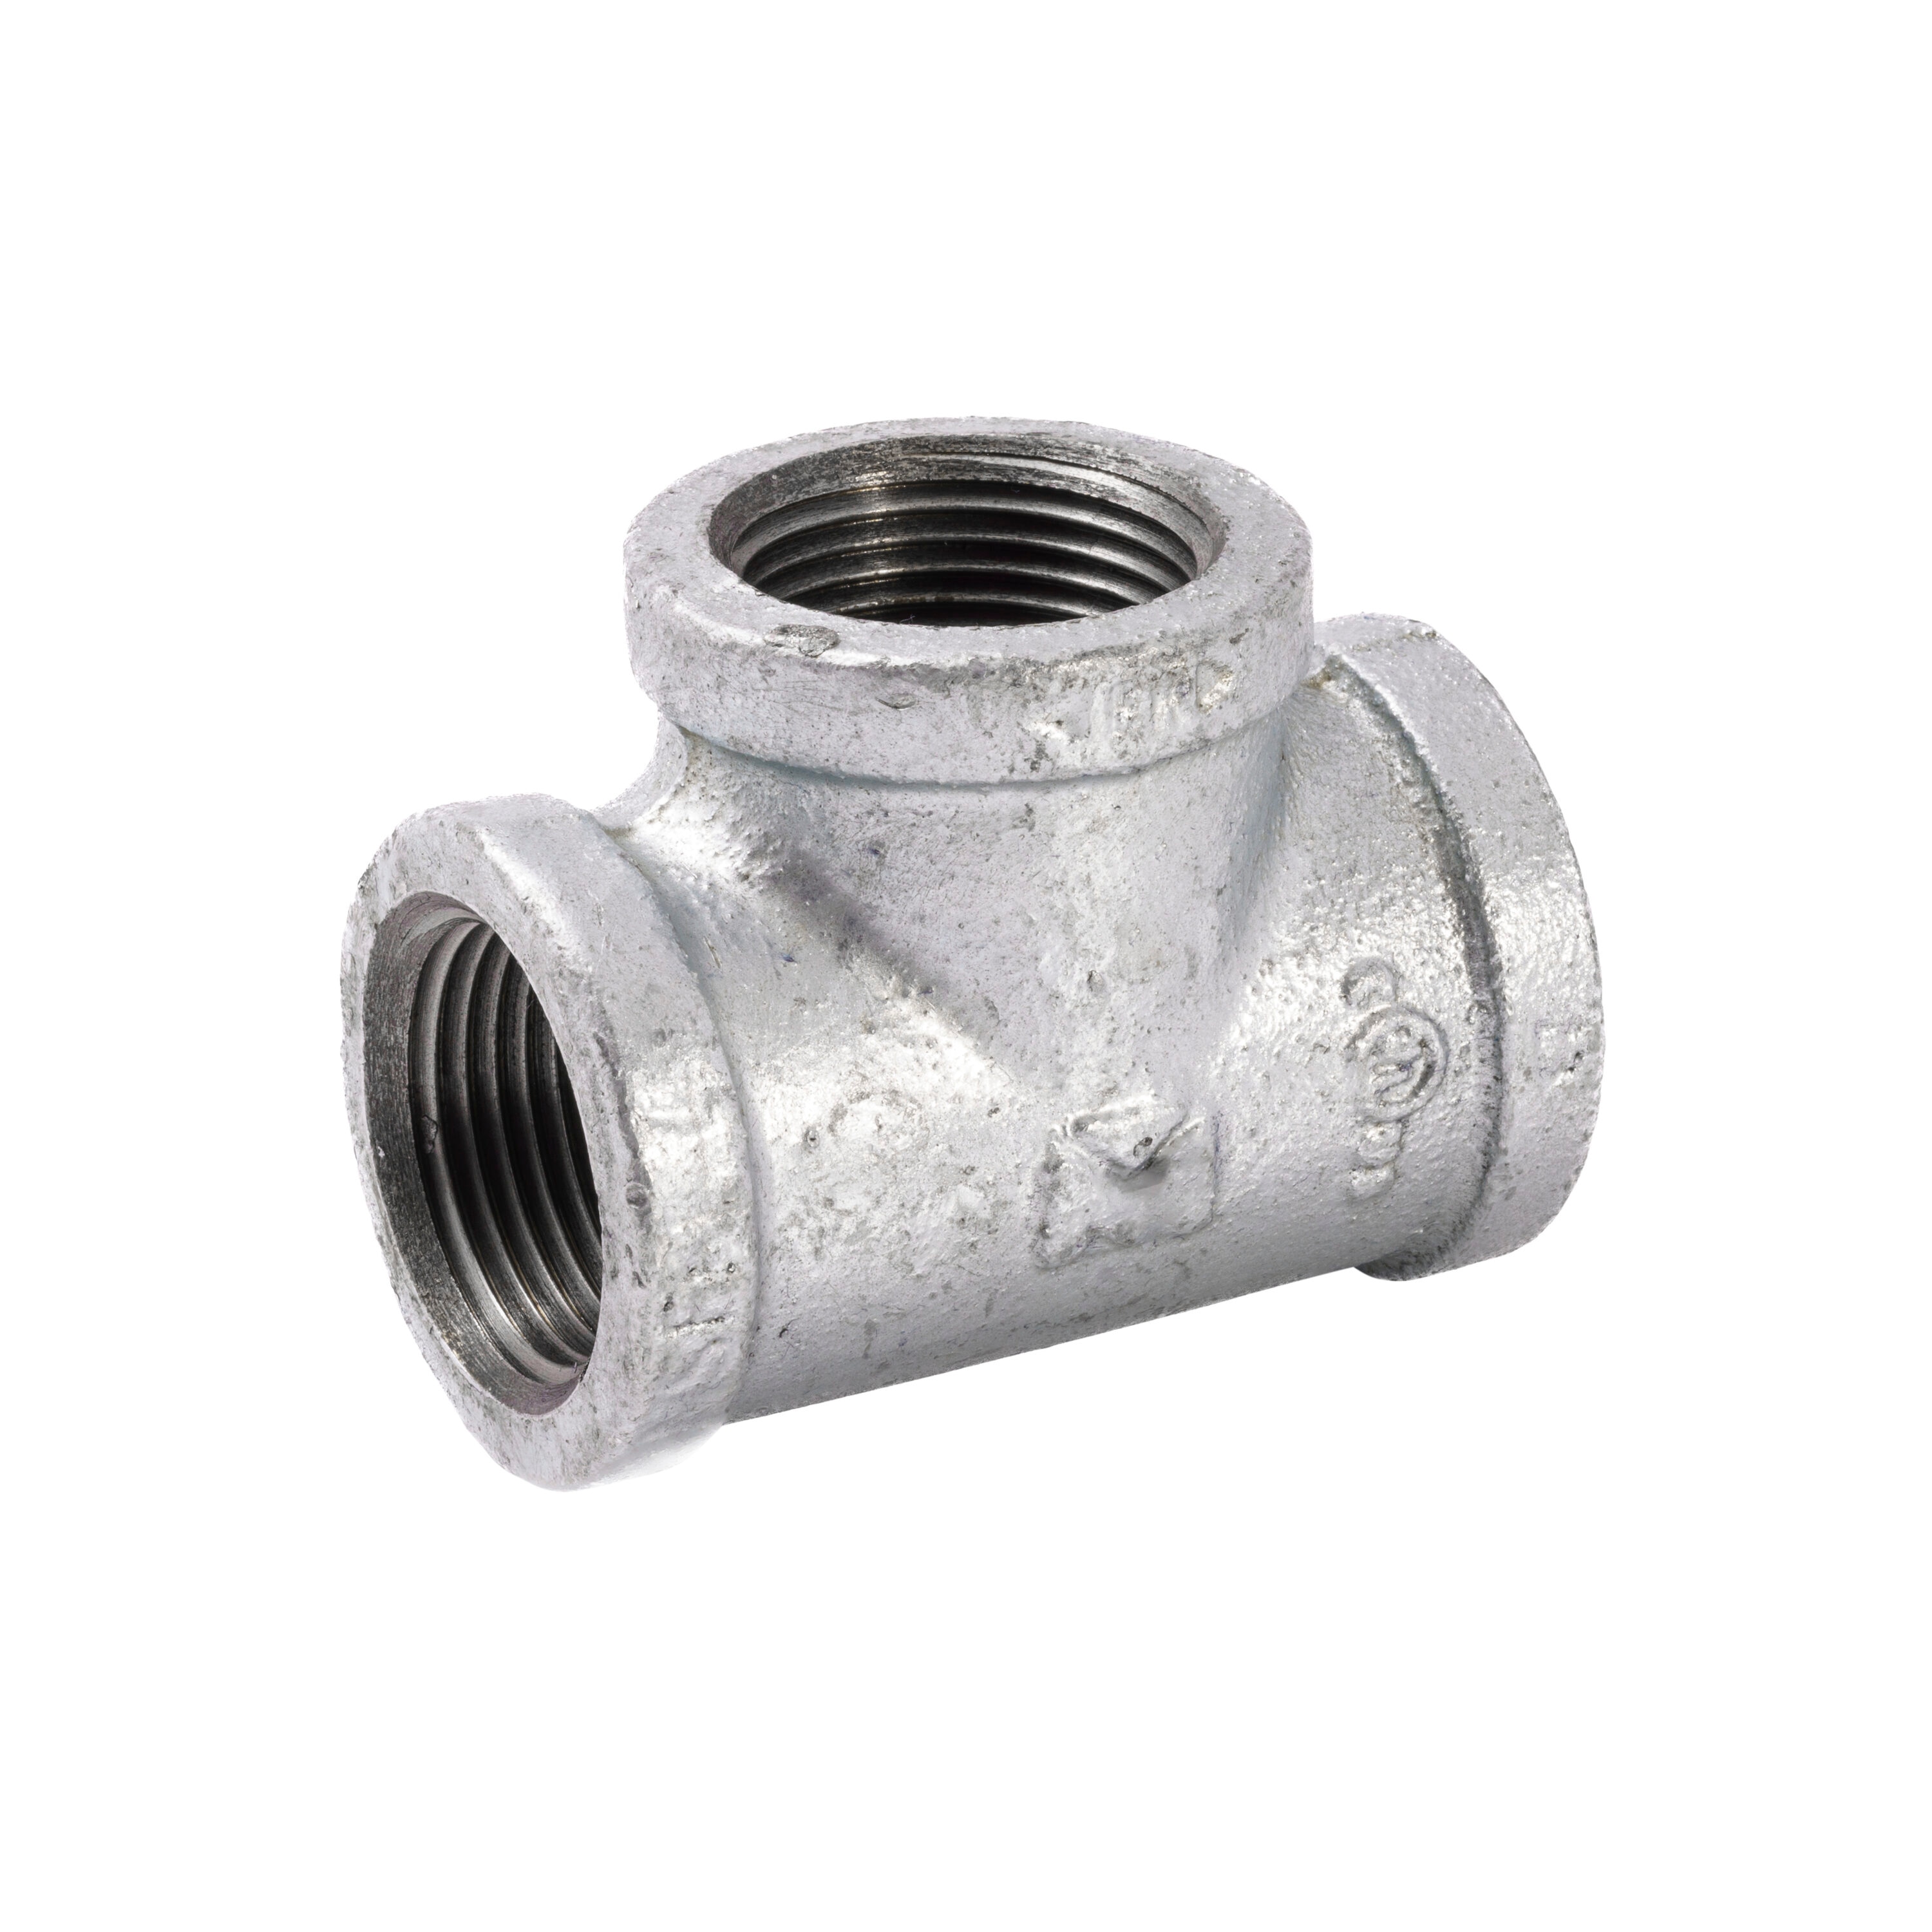 RELIABILT 1-in Galvanized Tee in the Galvanized Pipe & Fittings